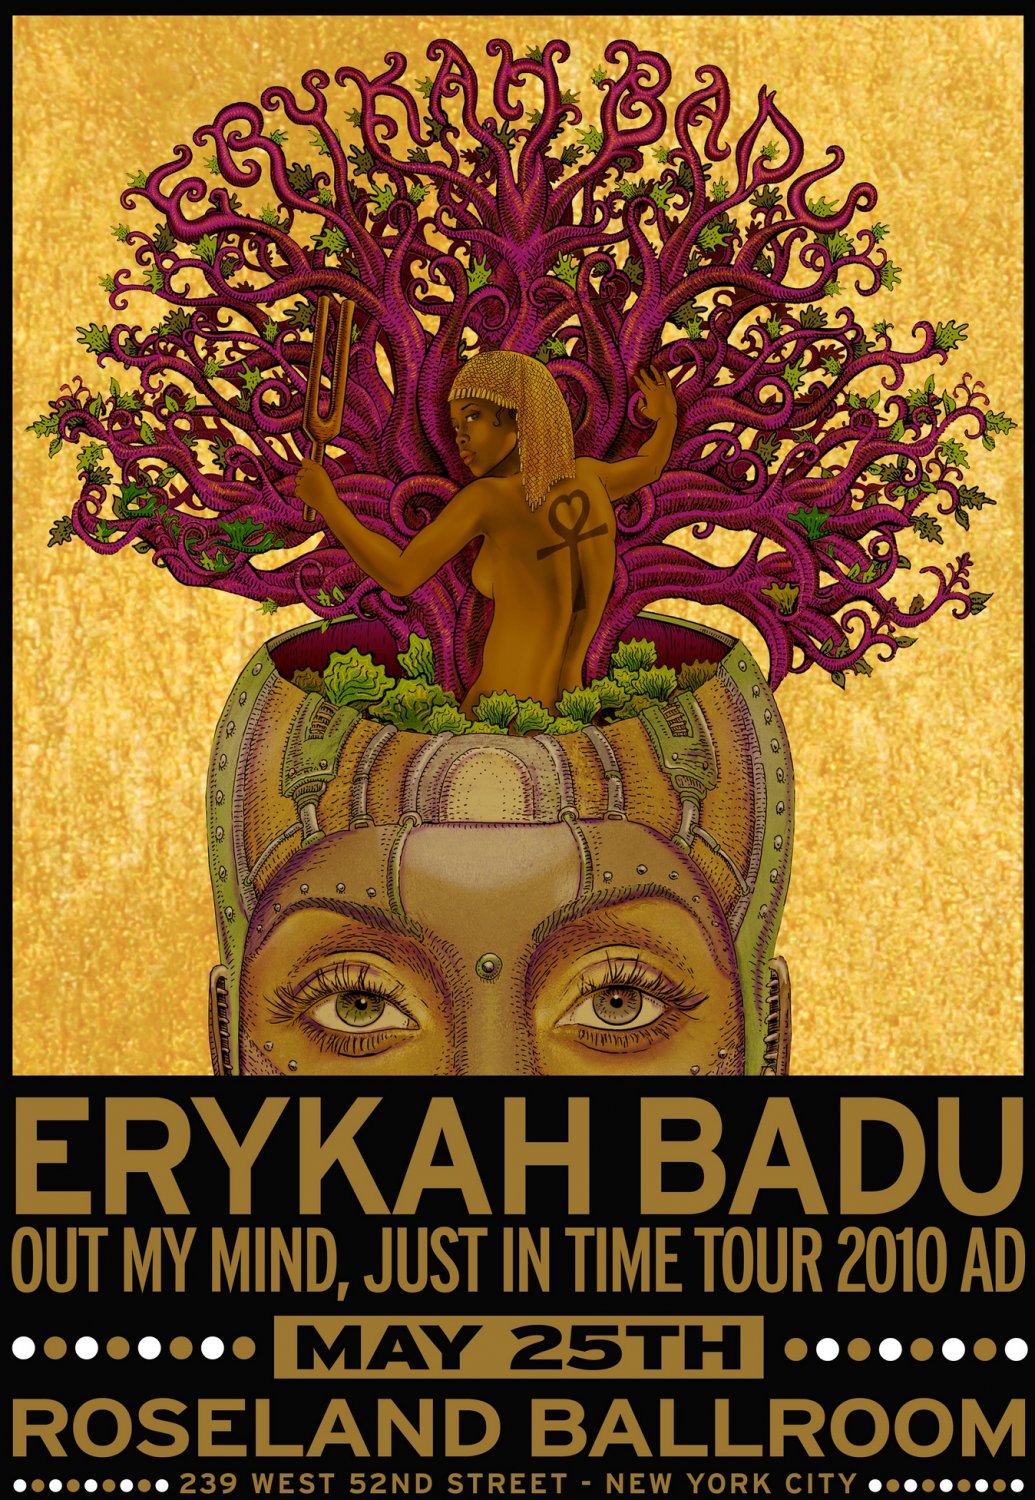 Erykah Badu Out my mind Just in time World Tour Concert 13"x19" (32cm/49cm) Polyester Fabric Poster